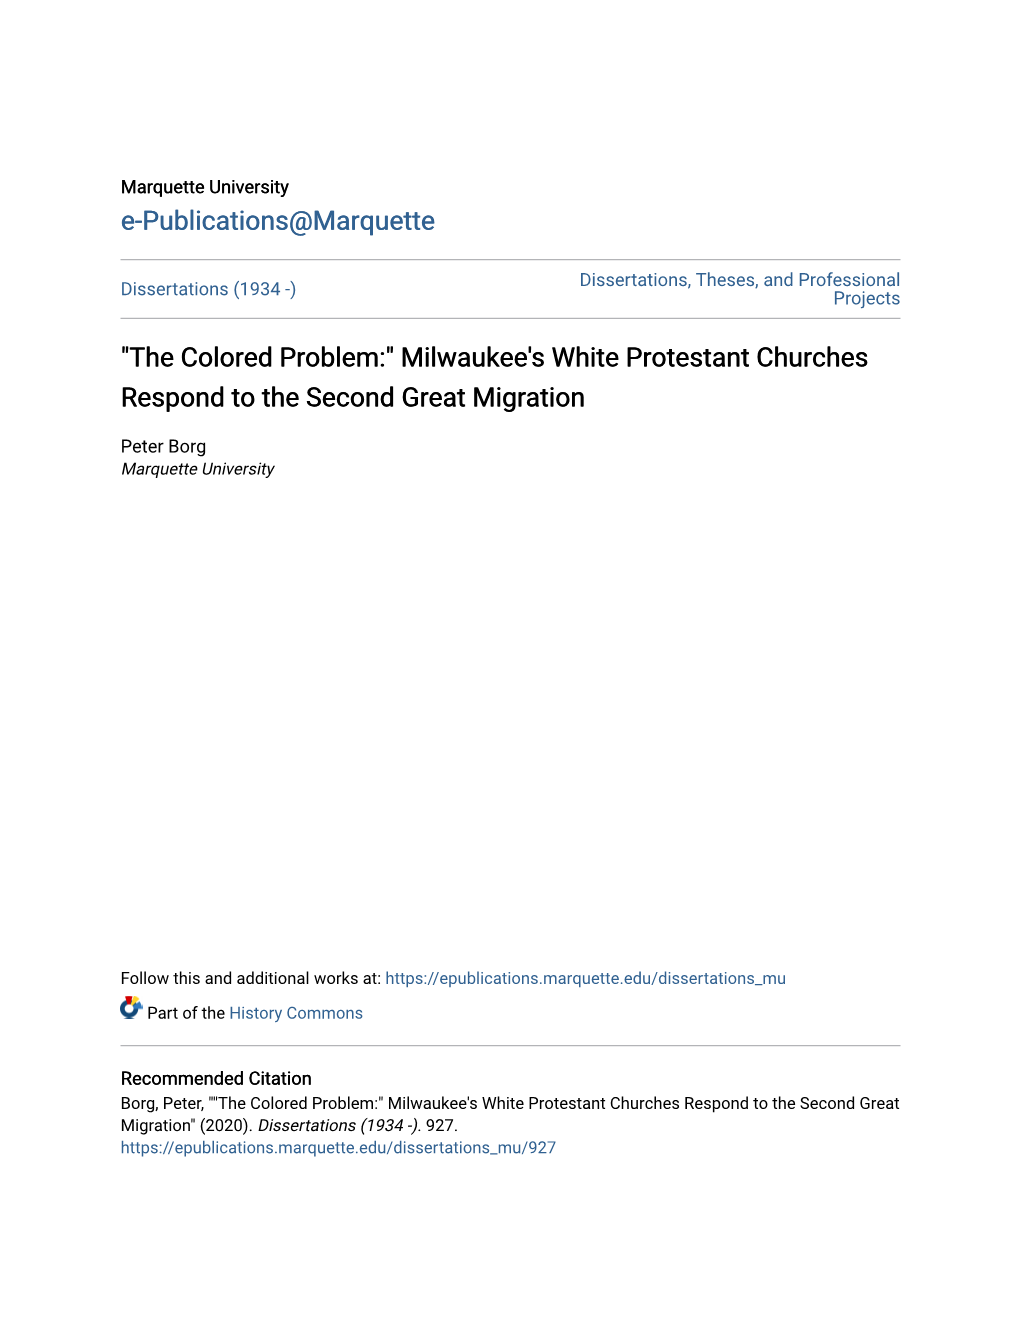 "The Colored Problem:" Milwaukee's White Protestant Churches Respond to the Second Great Migration